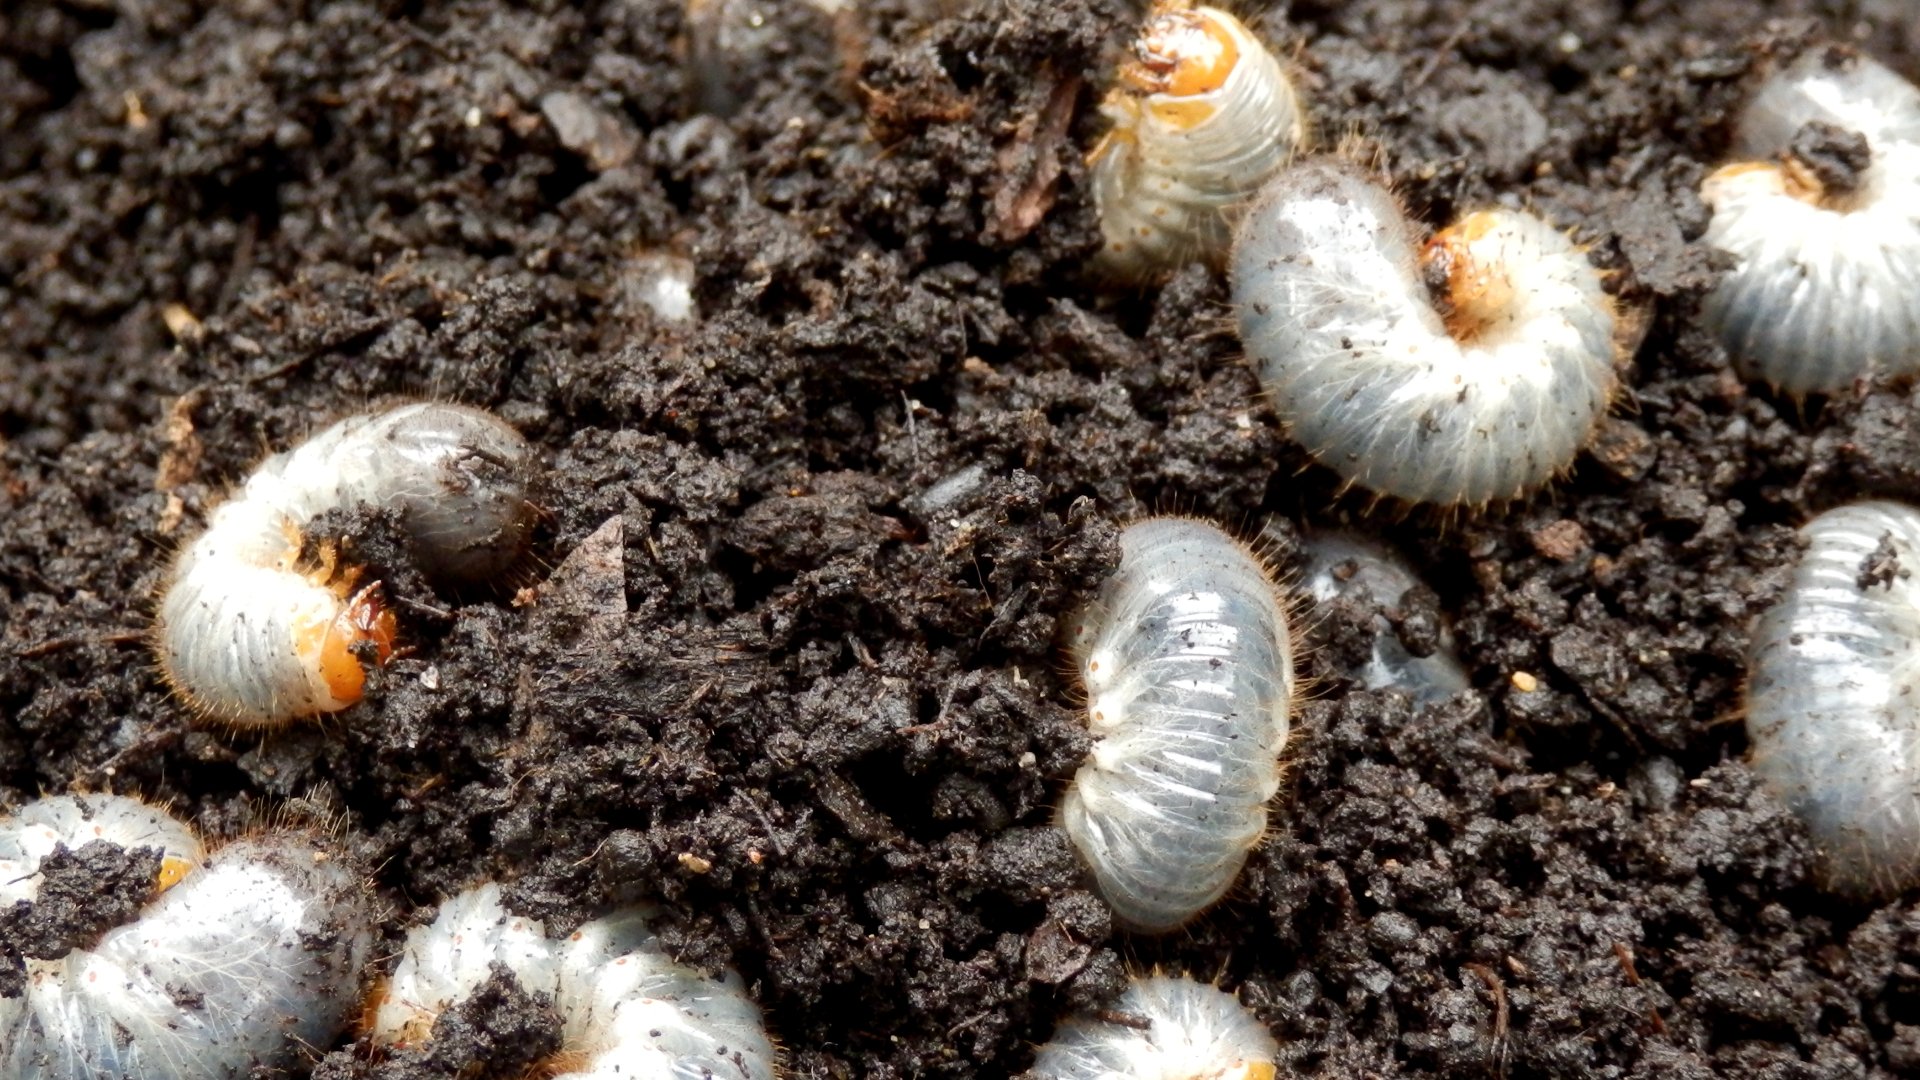 Grubs Damage Can Be Extensive - Here’s How To Keep Them off Your Lawn